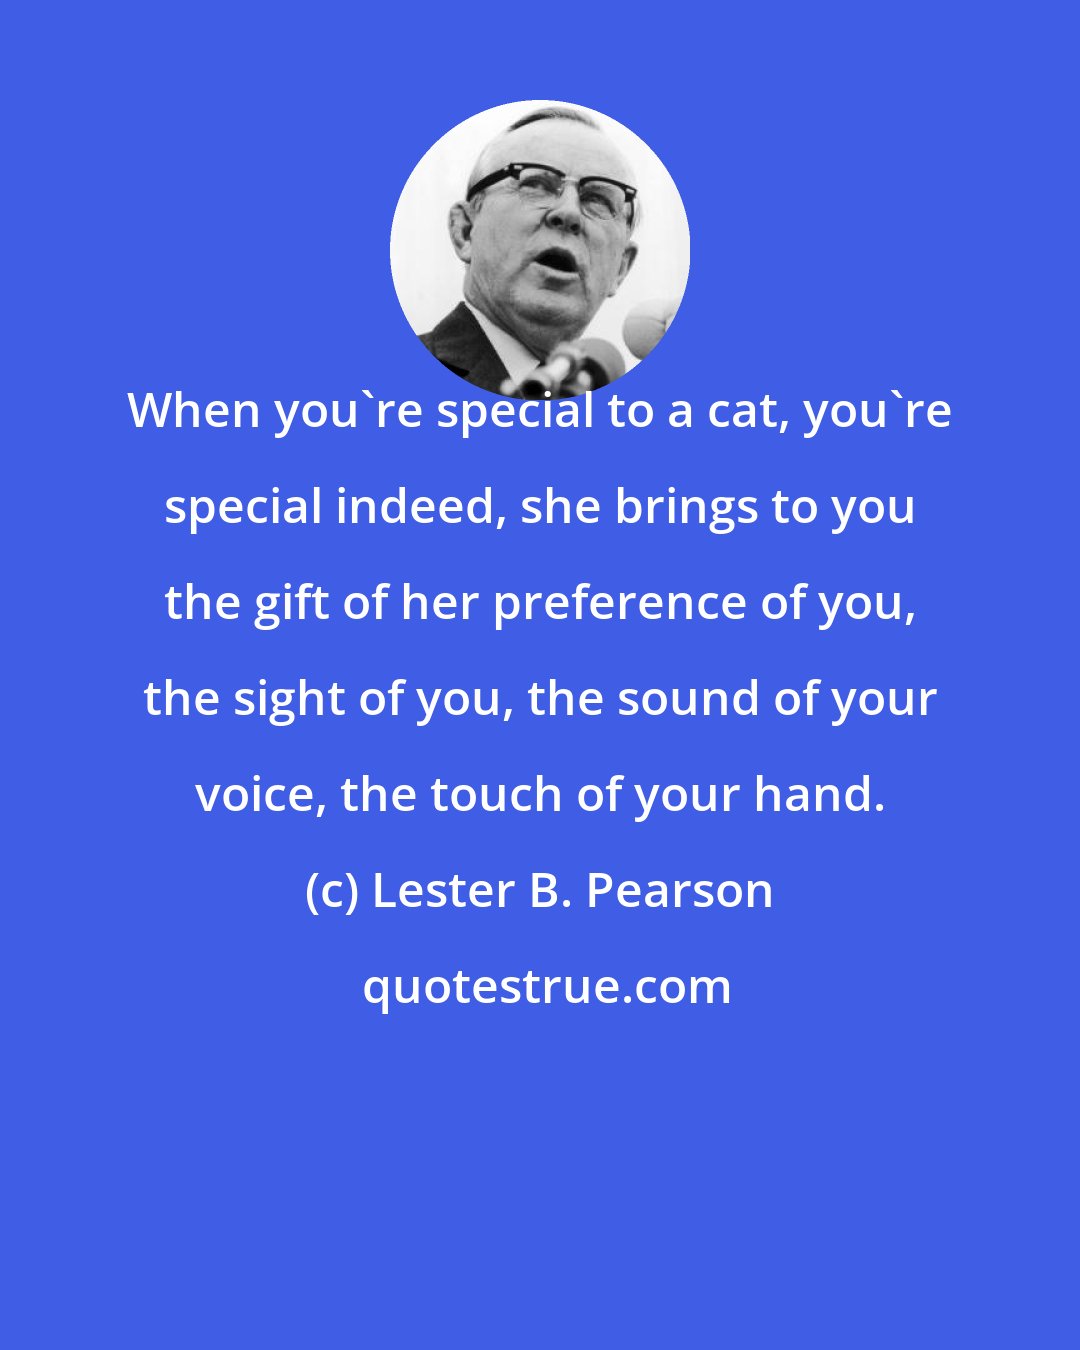 Lester B. Pearson: When you're special to a cat, you're special indeed, she brings to you the gift of her preference of you, the sight of you, the sound of your voice, the touch of your hand.